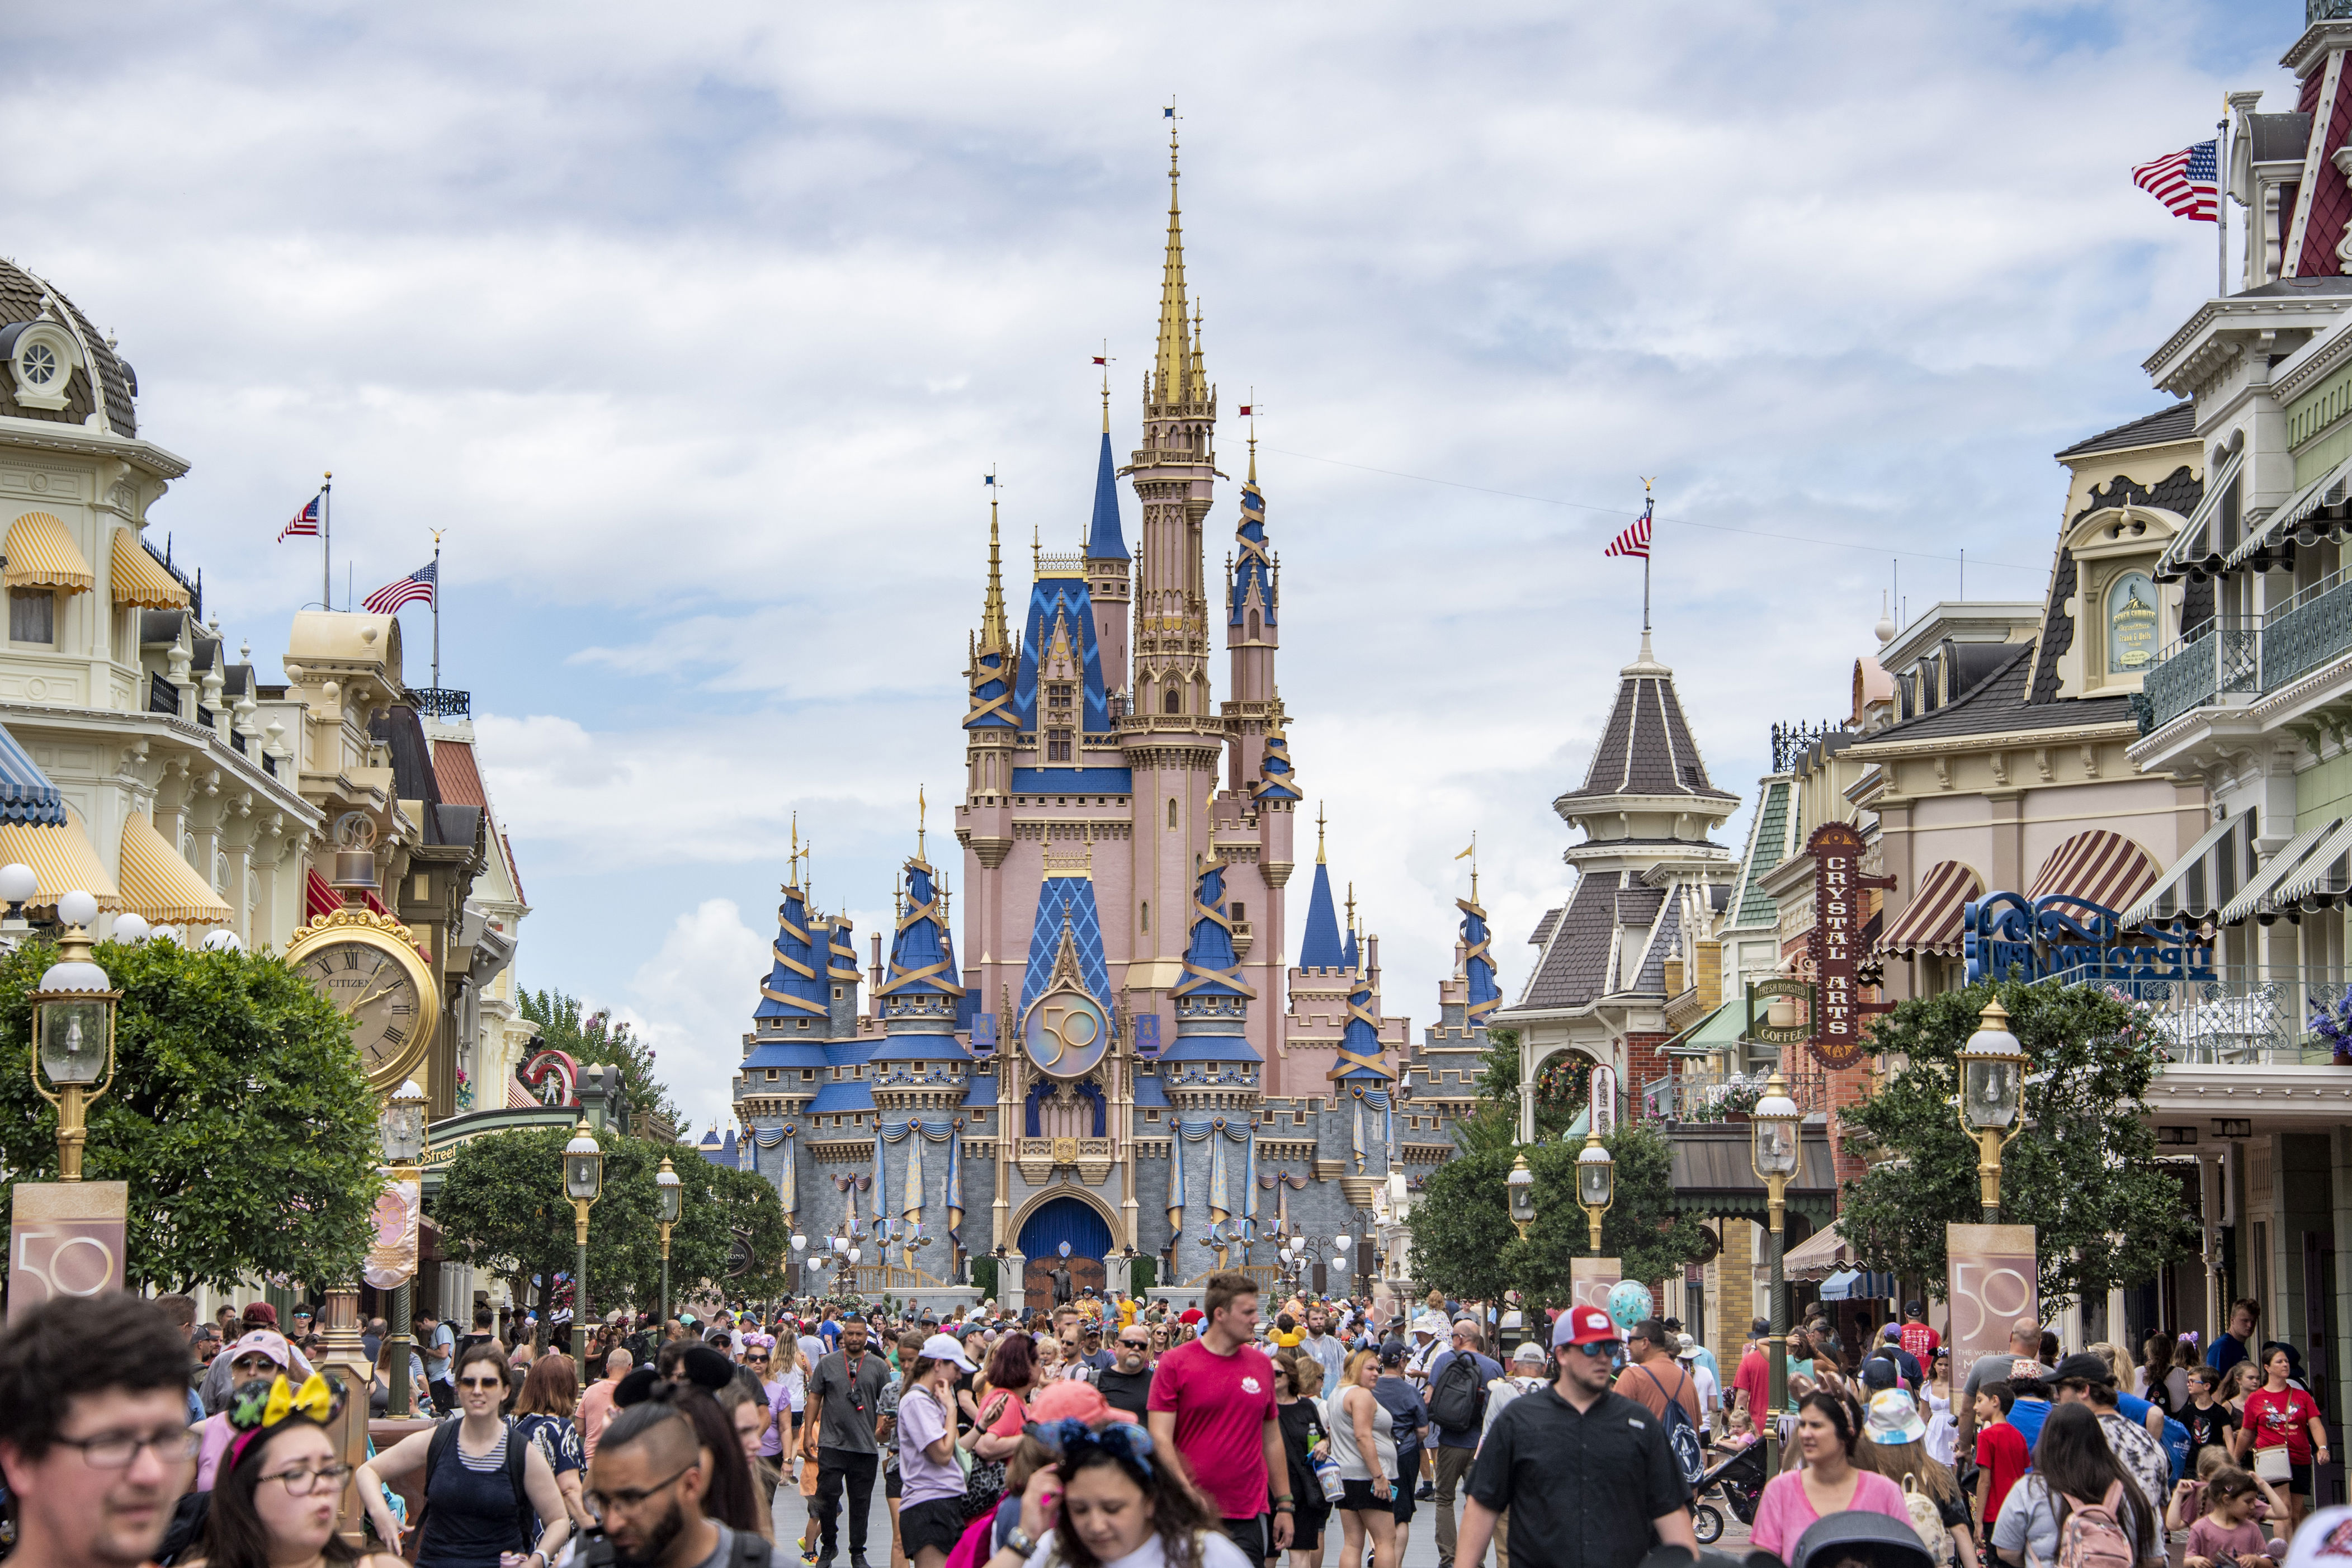 some disney fans abused disability access to skip lines. now rules are changing.